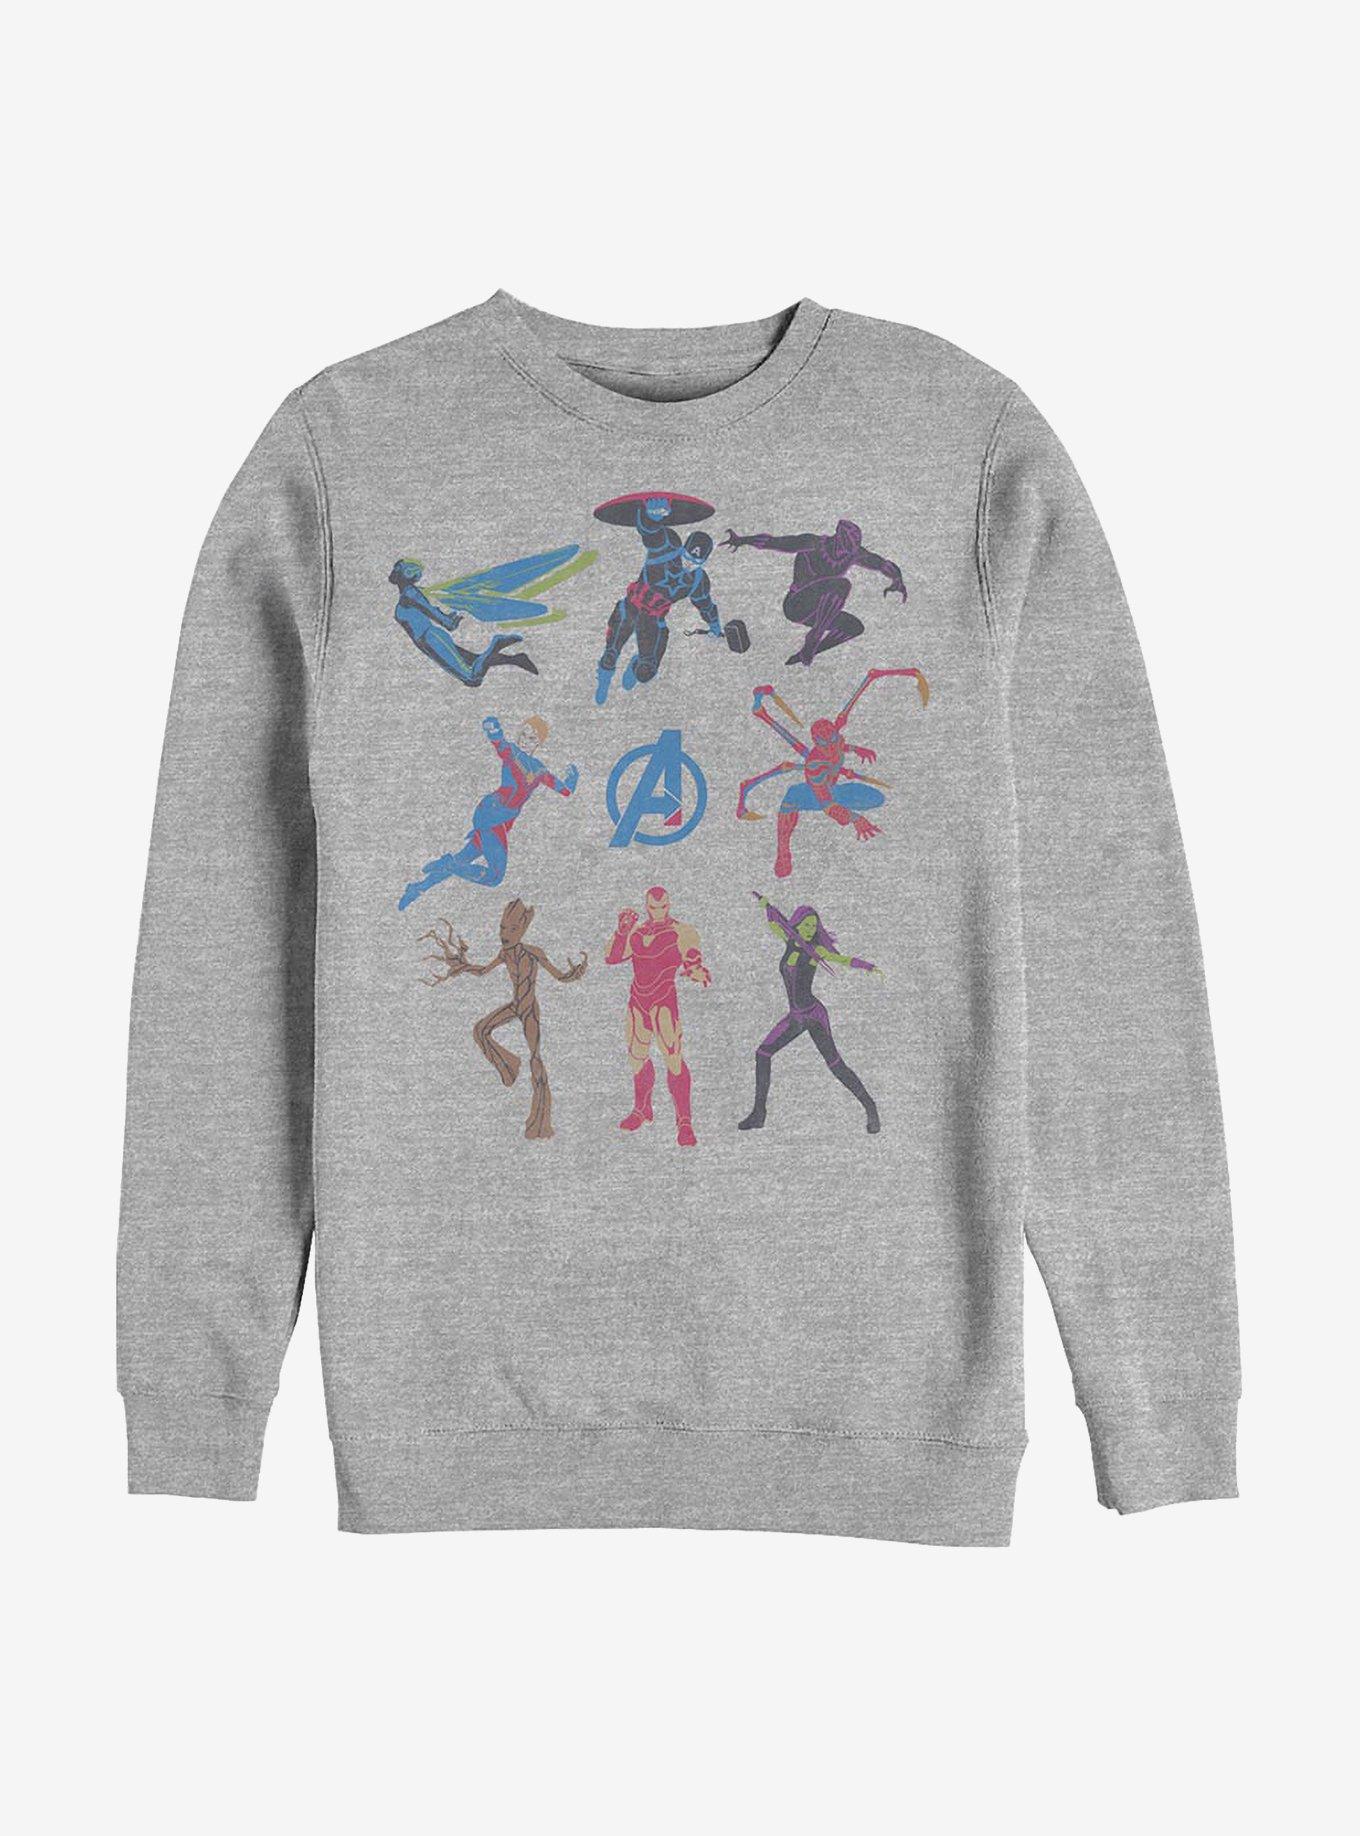 Marvel Avengers Character Collage Crew Sweatshirt, ATH HTR, hi-res